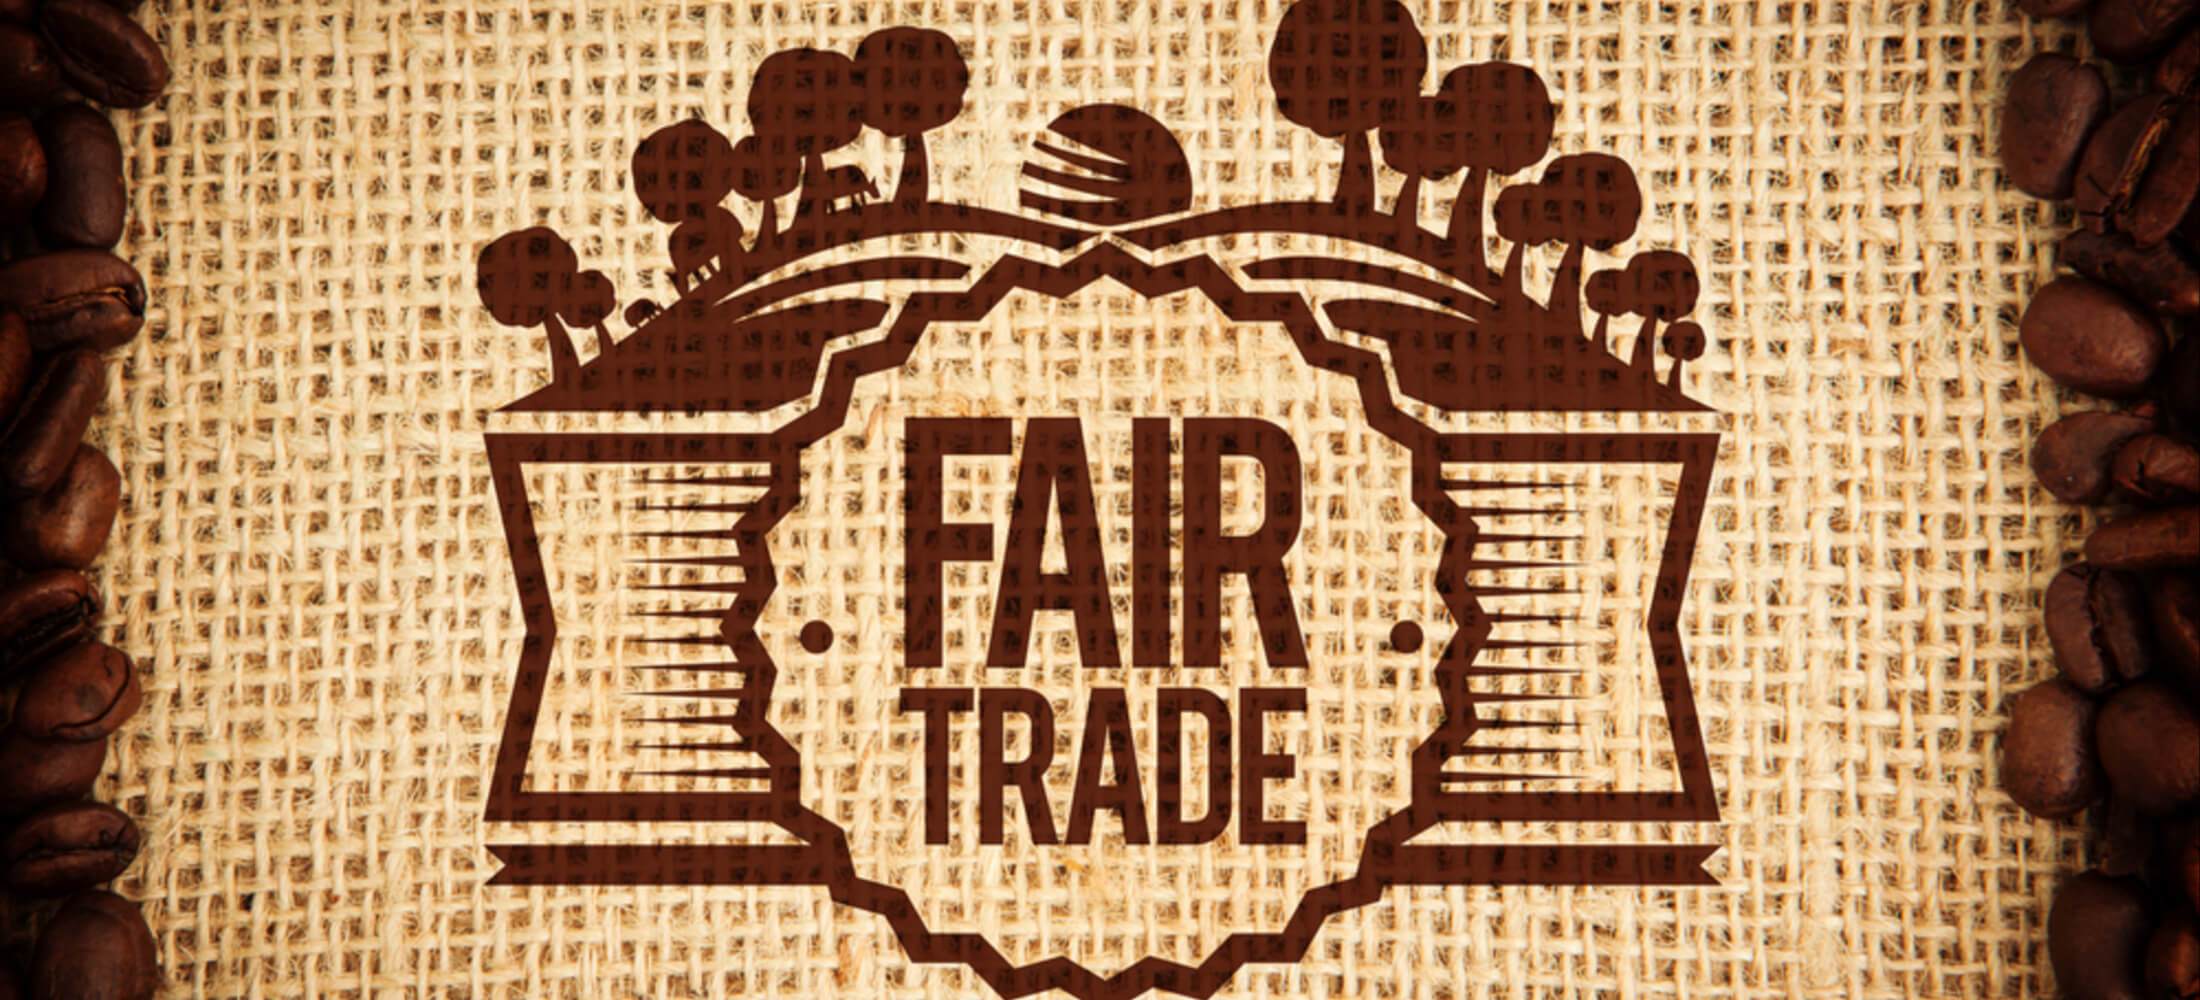 Fair Trade Coffee Benefits Communities and the Environment